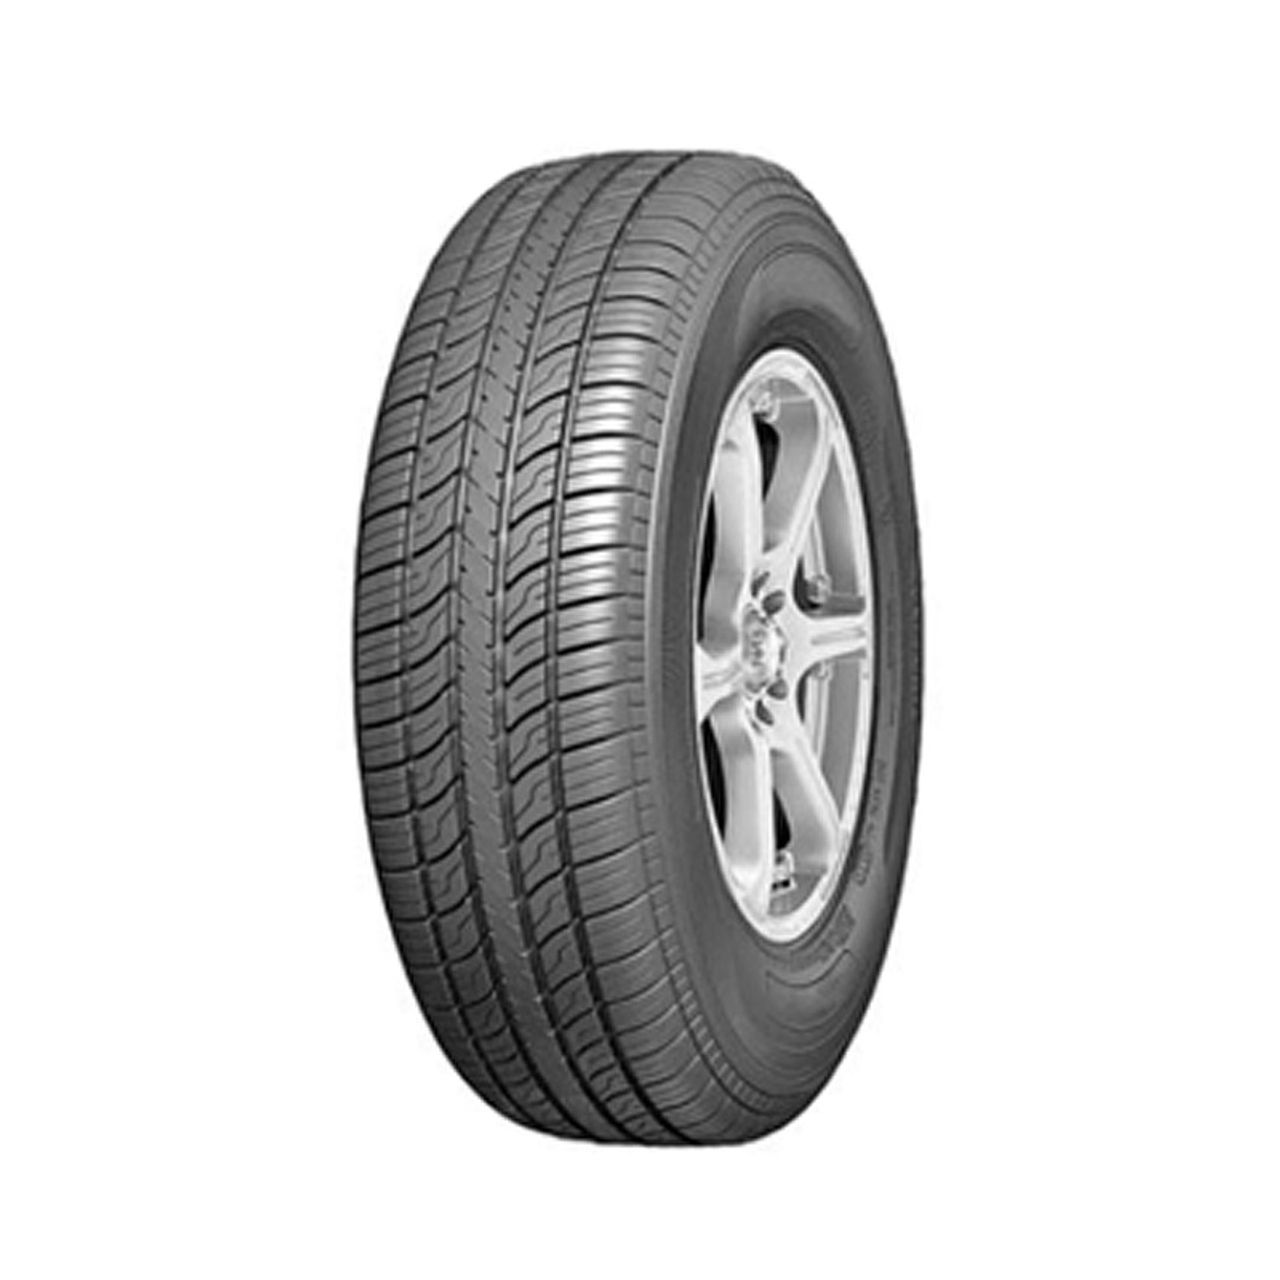 ROVELO RHP-780 165/70R14 81T BSW